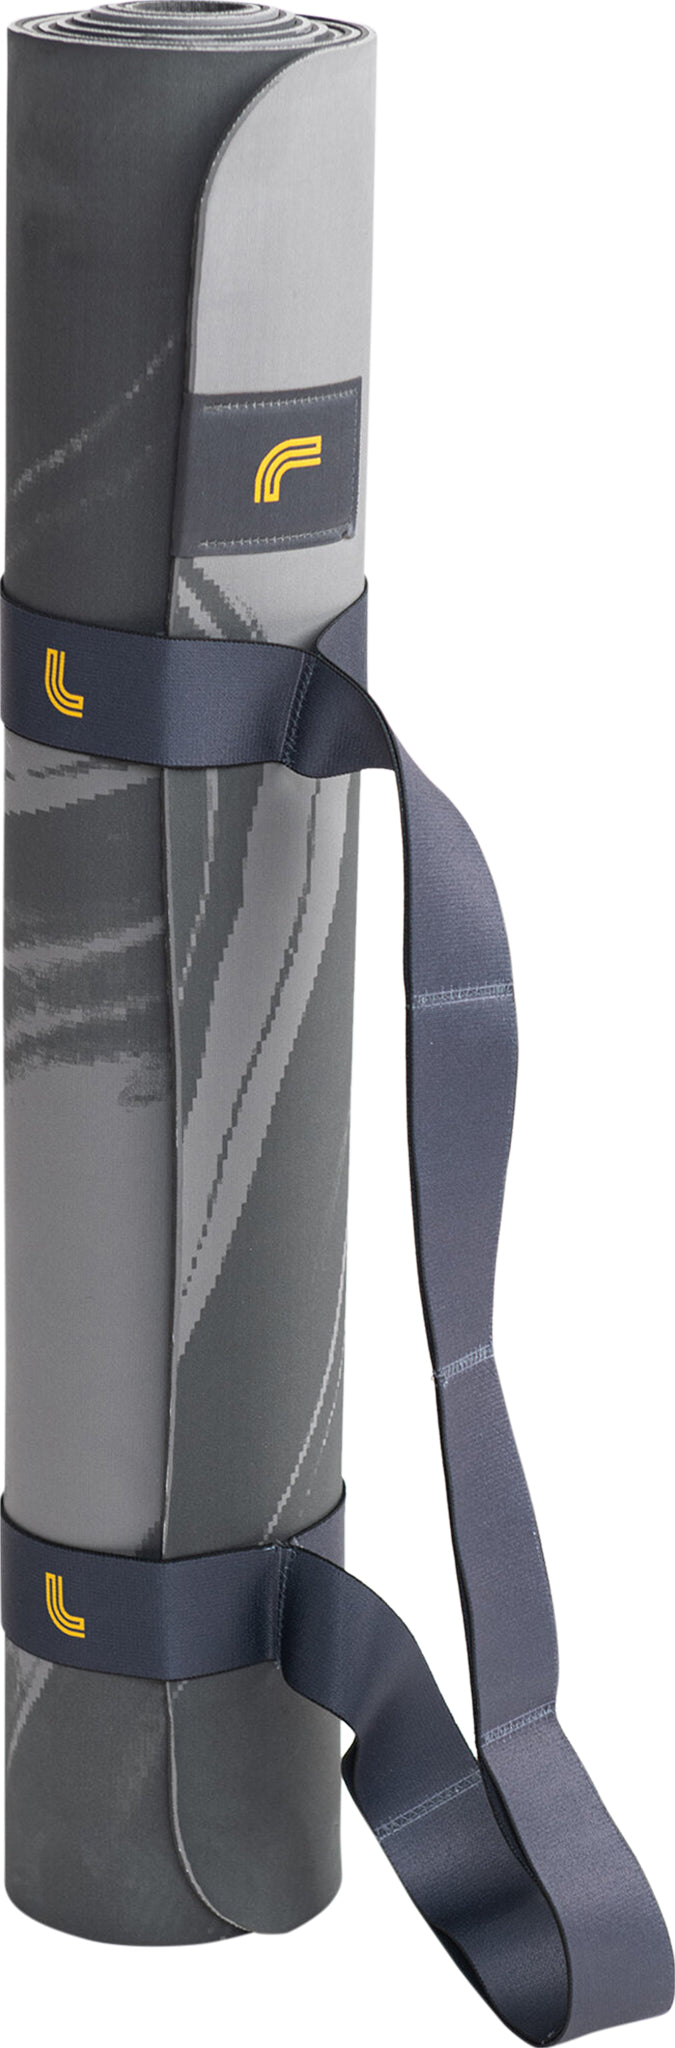 Lole, Other, New Lole Prima Yoga Mat With Straps Dark Blue